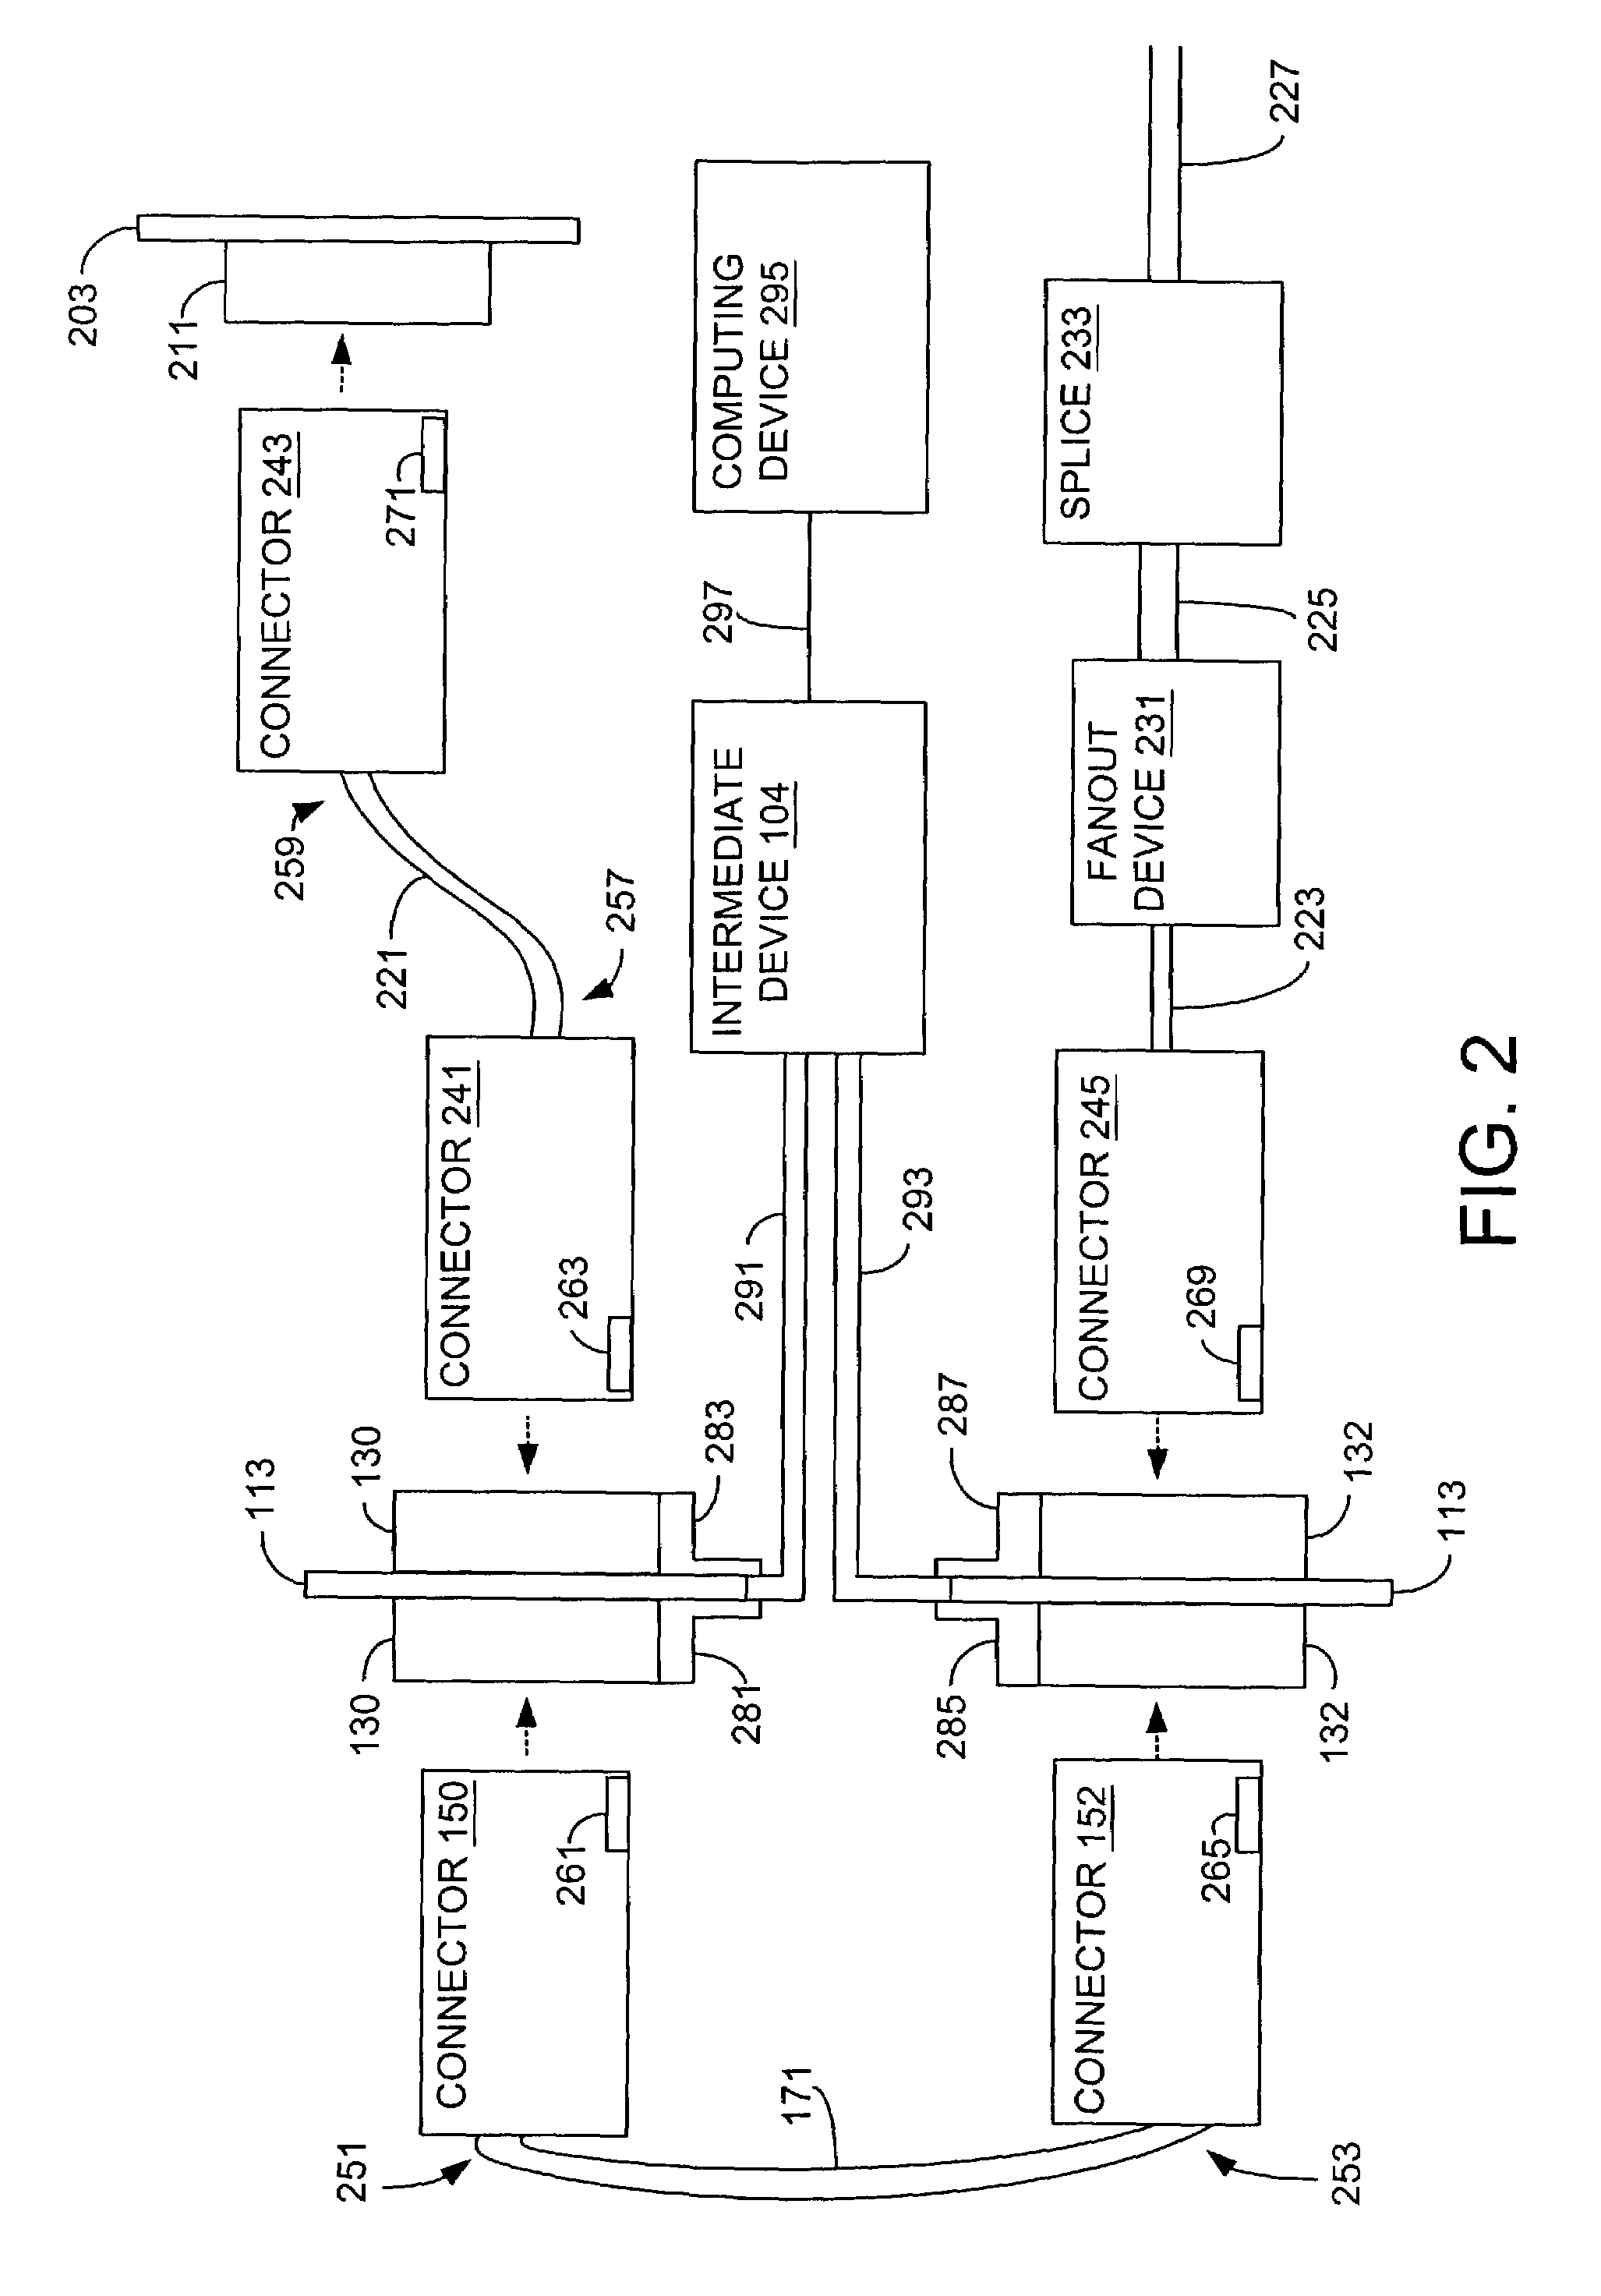 Self-registration systems and methods for dynamically updating information related to a network